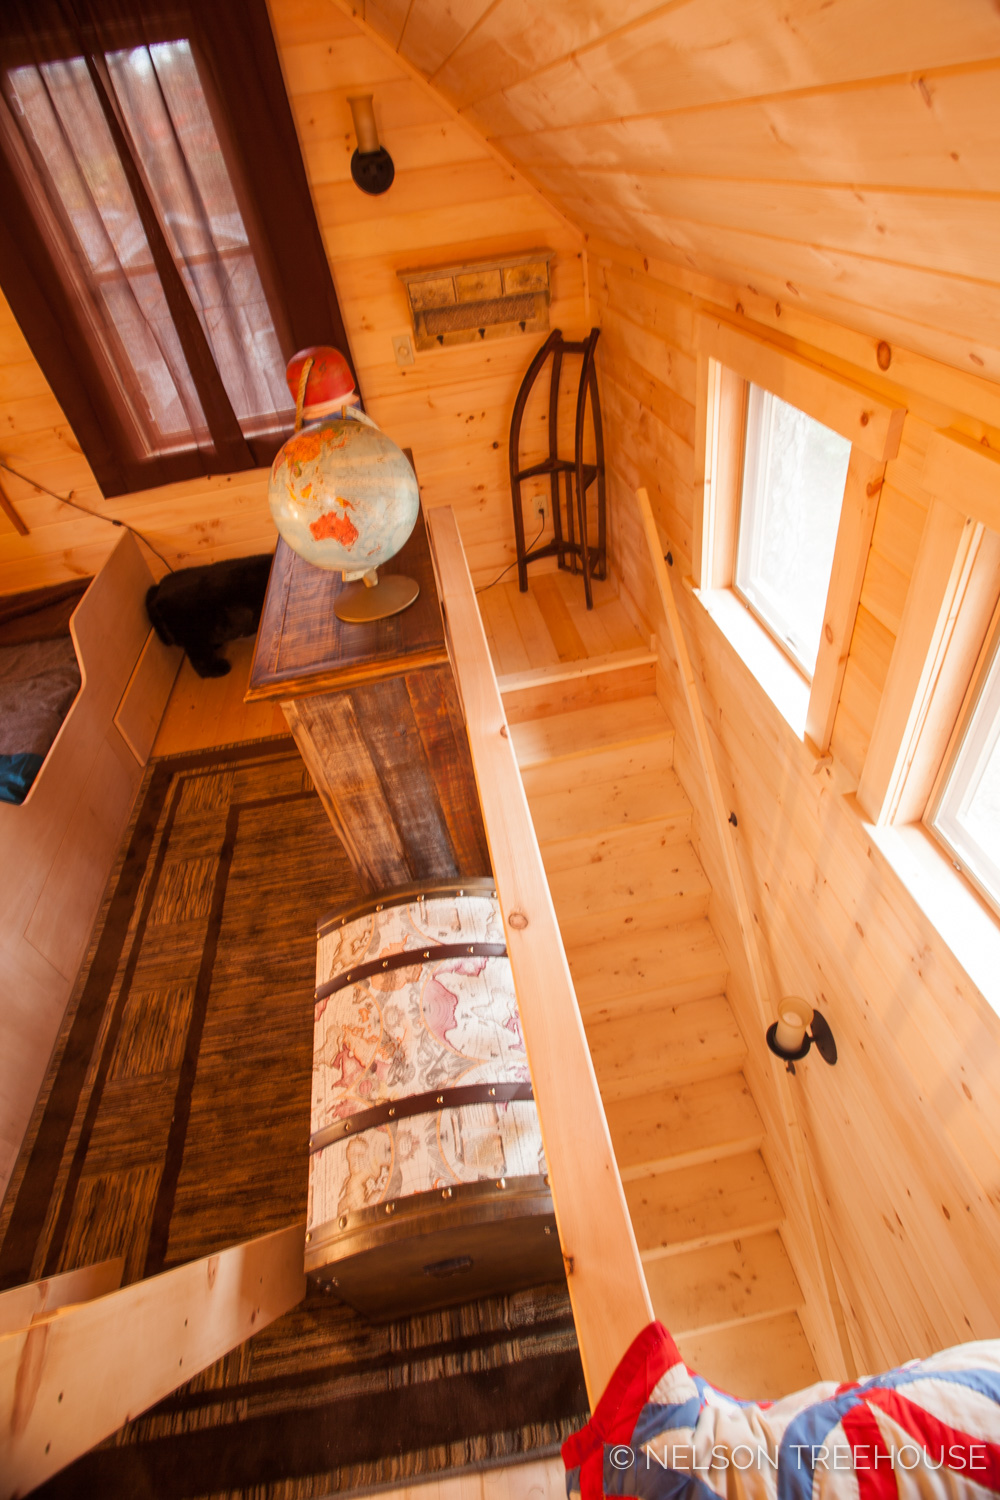  Nelson Treehouse - Adventure TEmple Staircase to bunk loft 